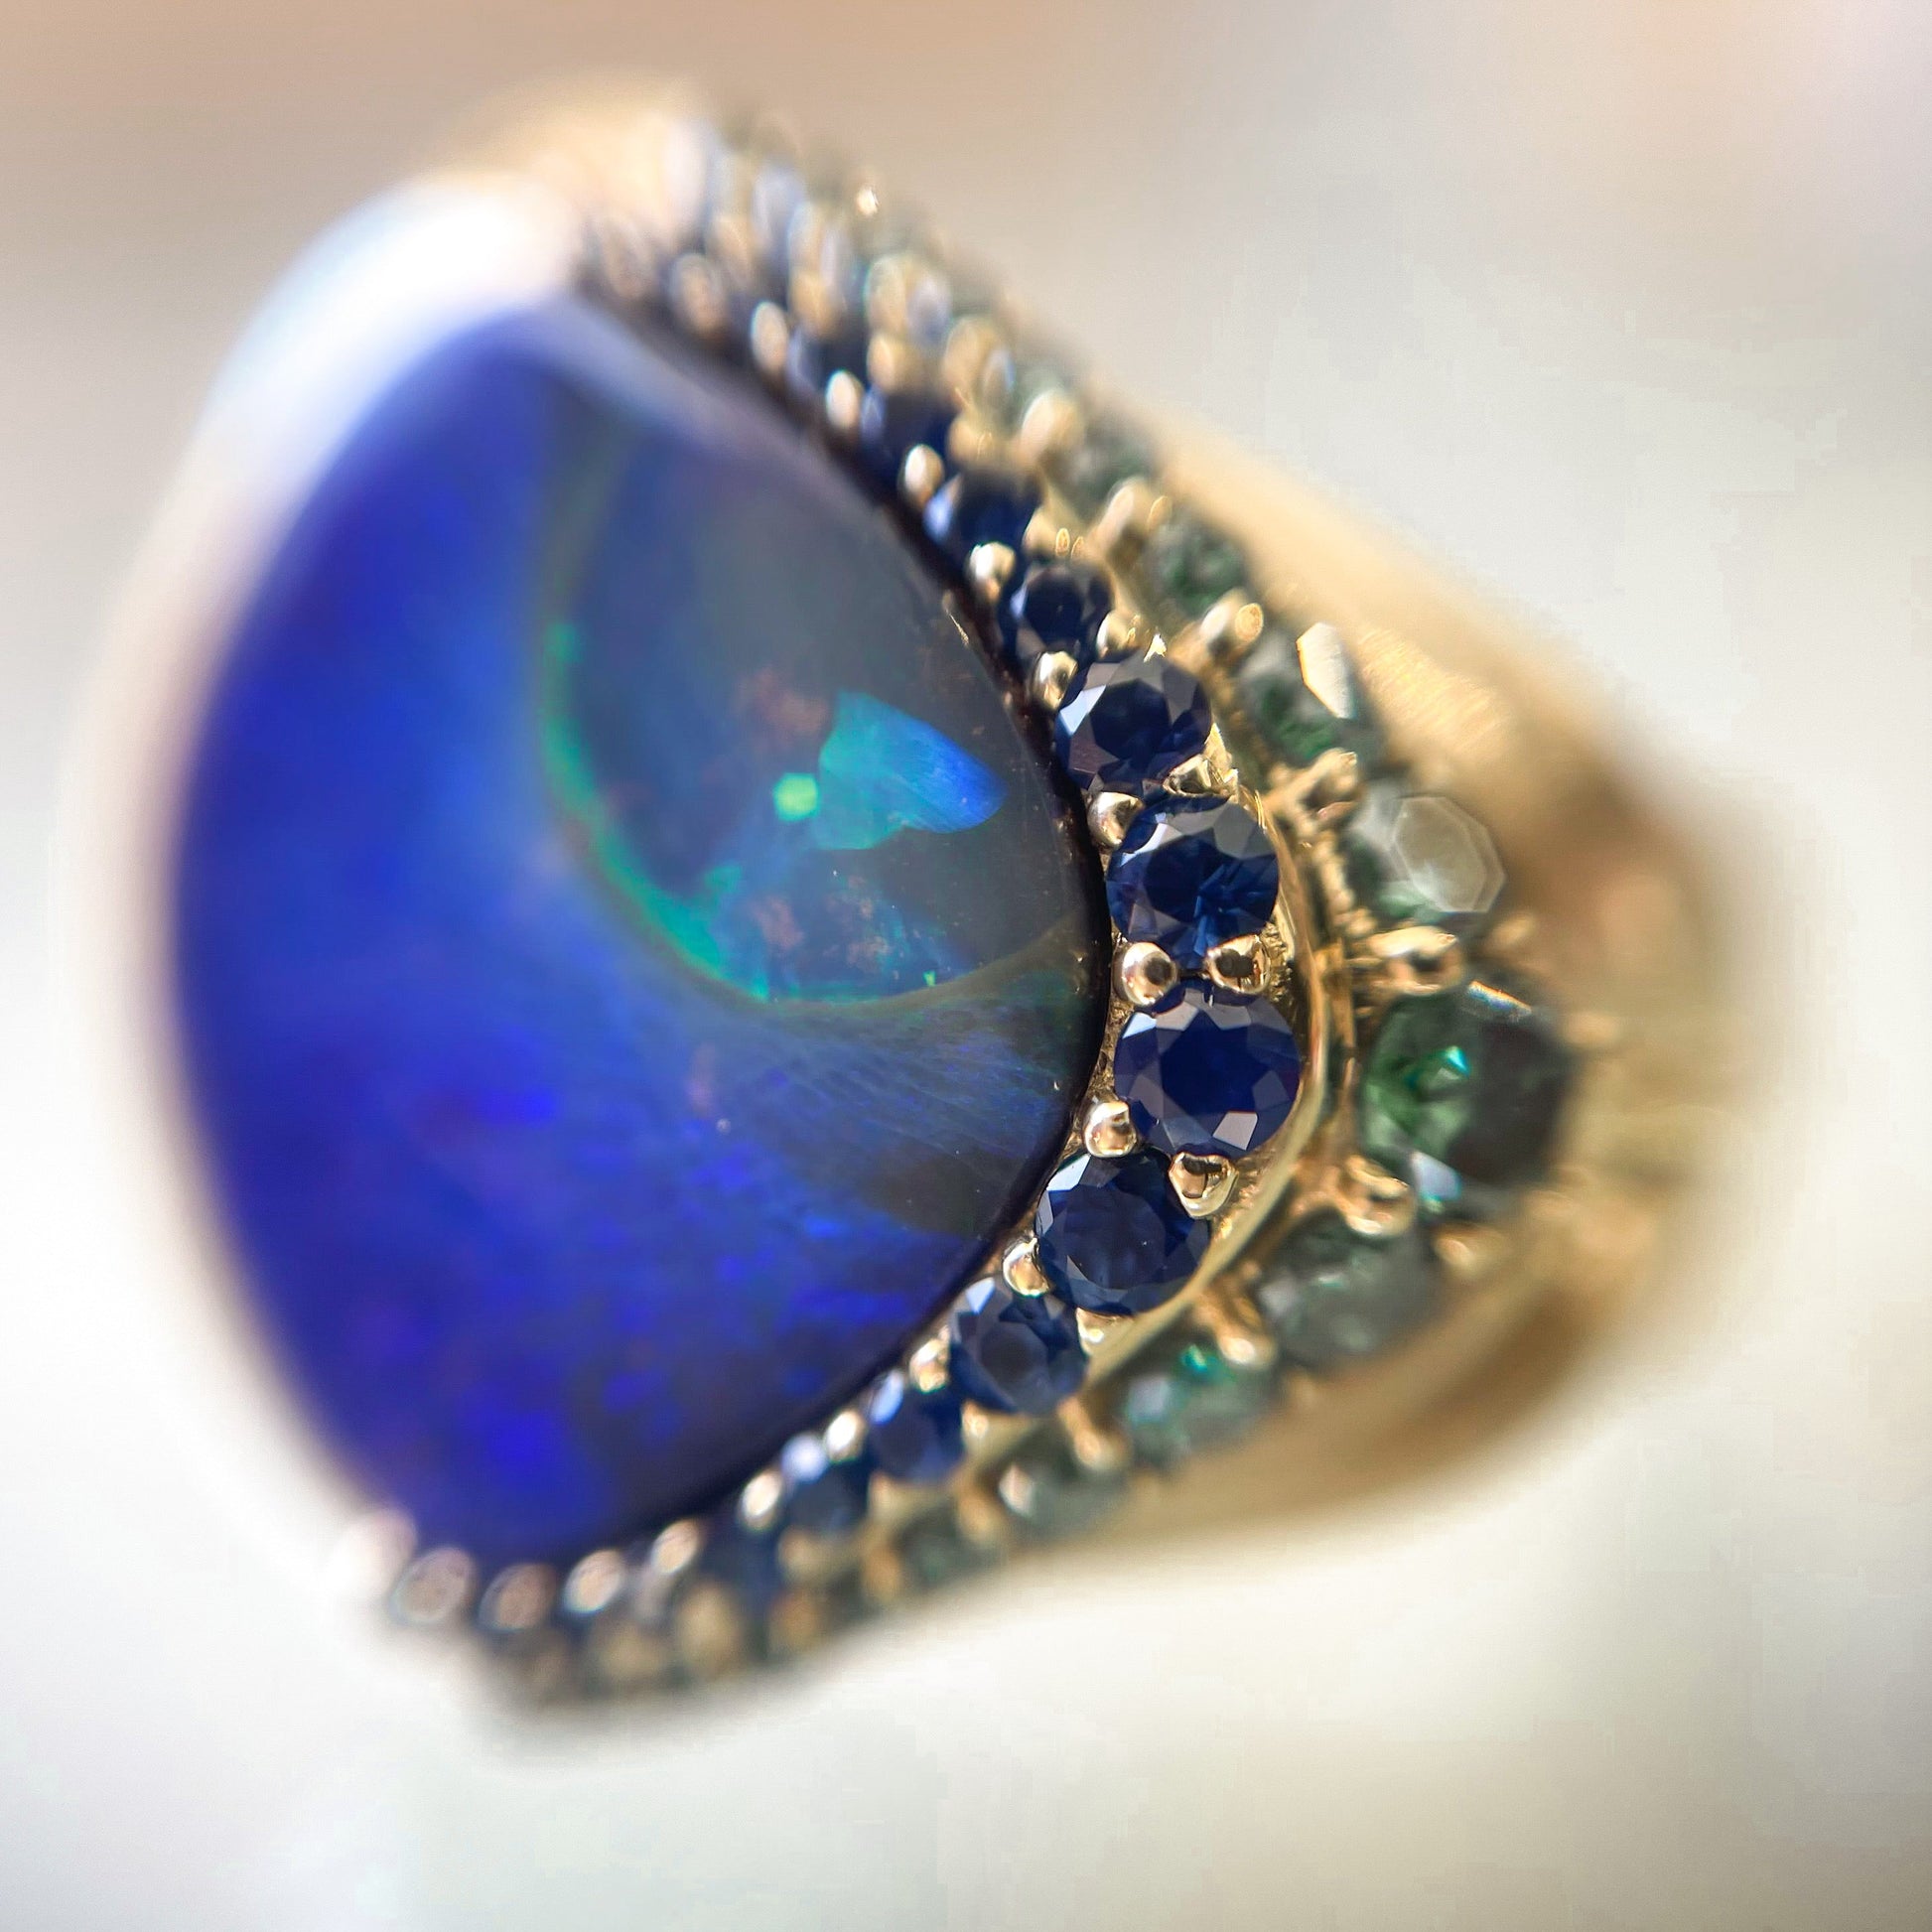 Australian Opal Ring by NIXIN Jewelry under magnification. Sapphire, Diamond and Opal ring.